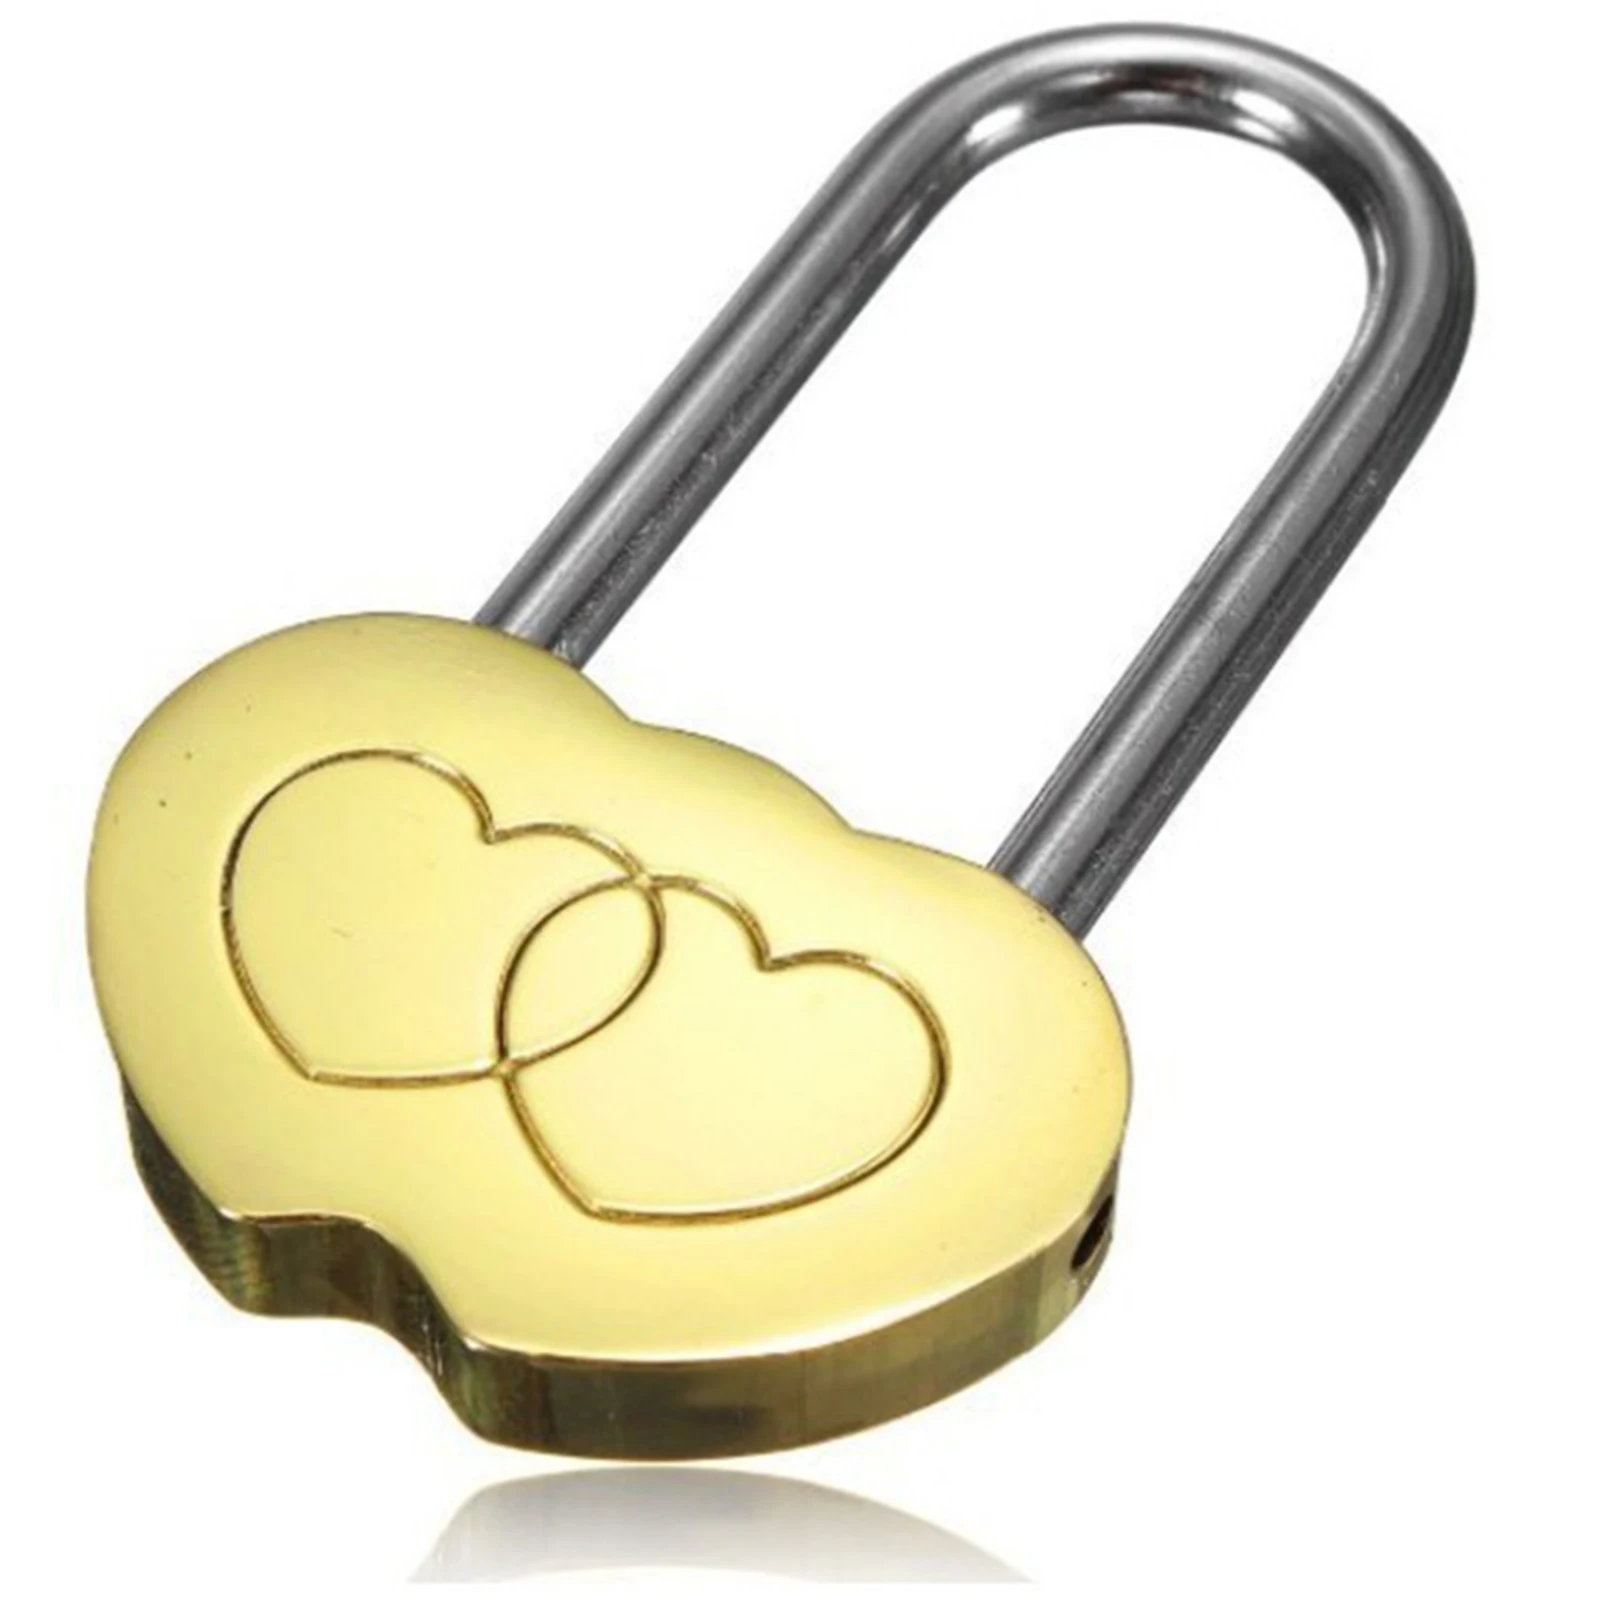 

Hot Sale Padlock Love Lock Wishing Lock Engraved Double Heart Valentines Anniversary Day Gifts